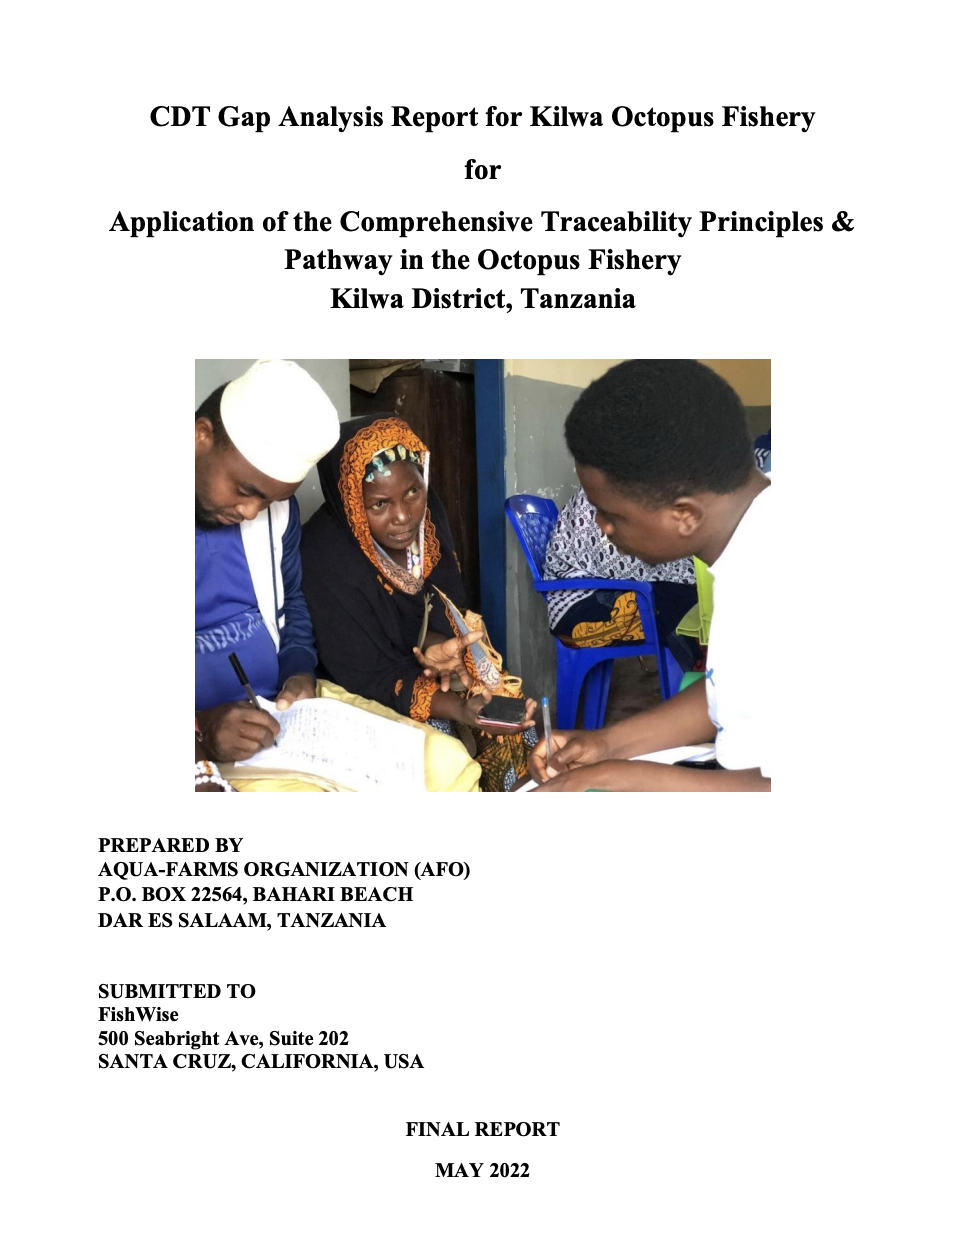 Catch Documentation and Traceability Gap Analysis Report for Kilwa District Octopus Fishery